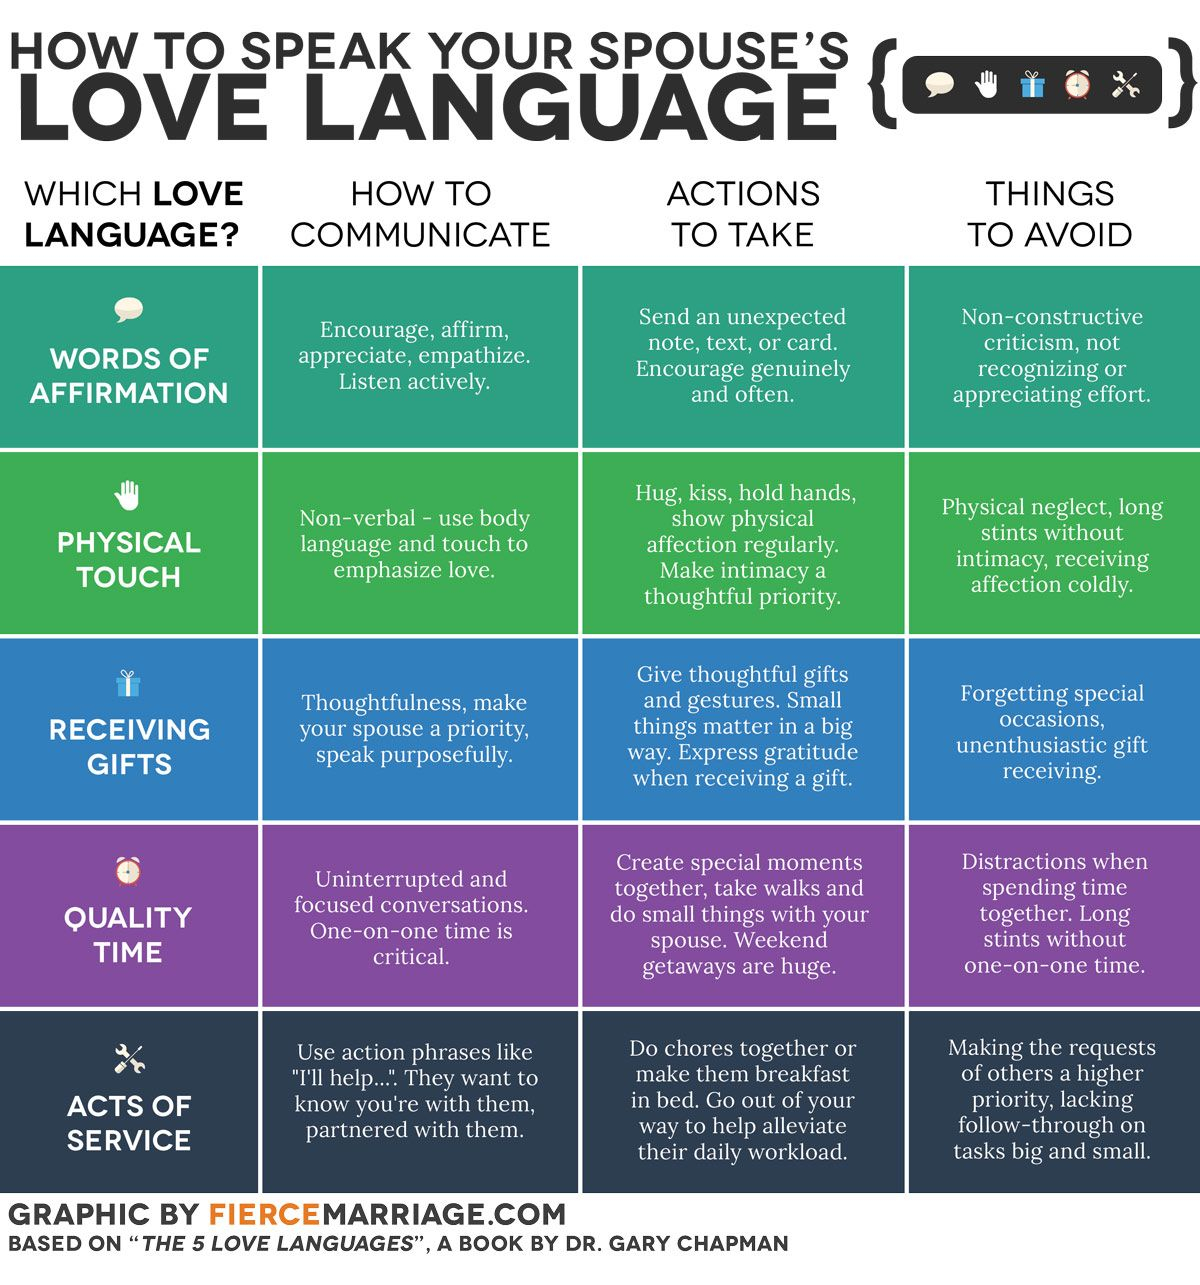 How To Speak Your Spouse s Love Language and What To 